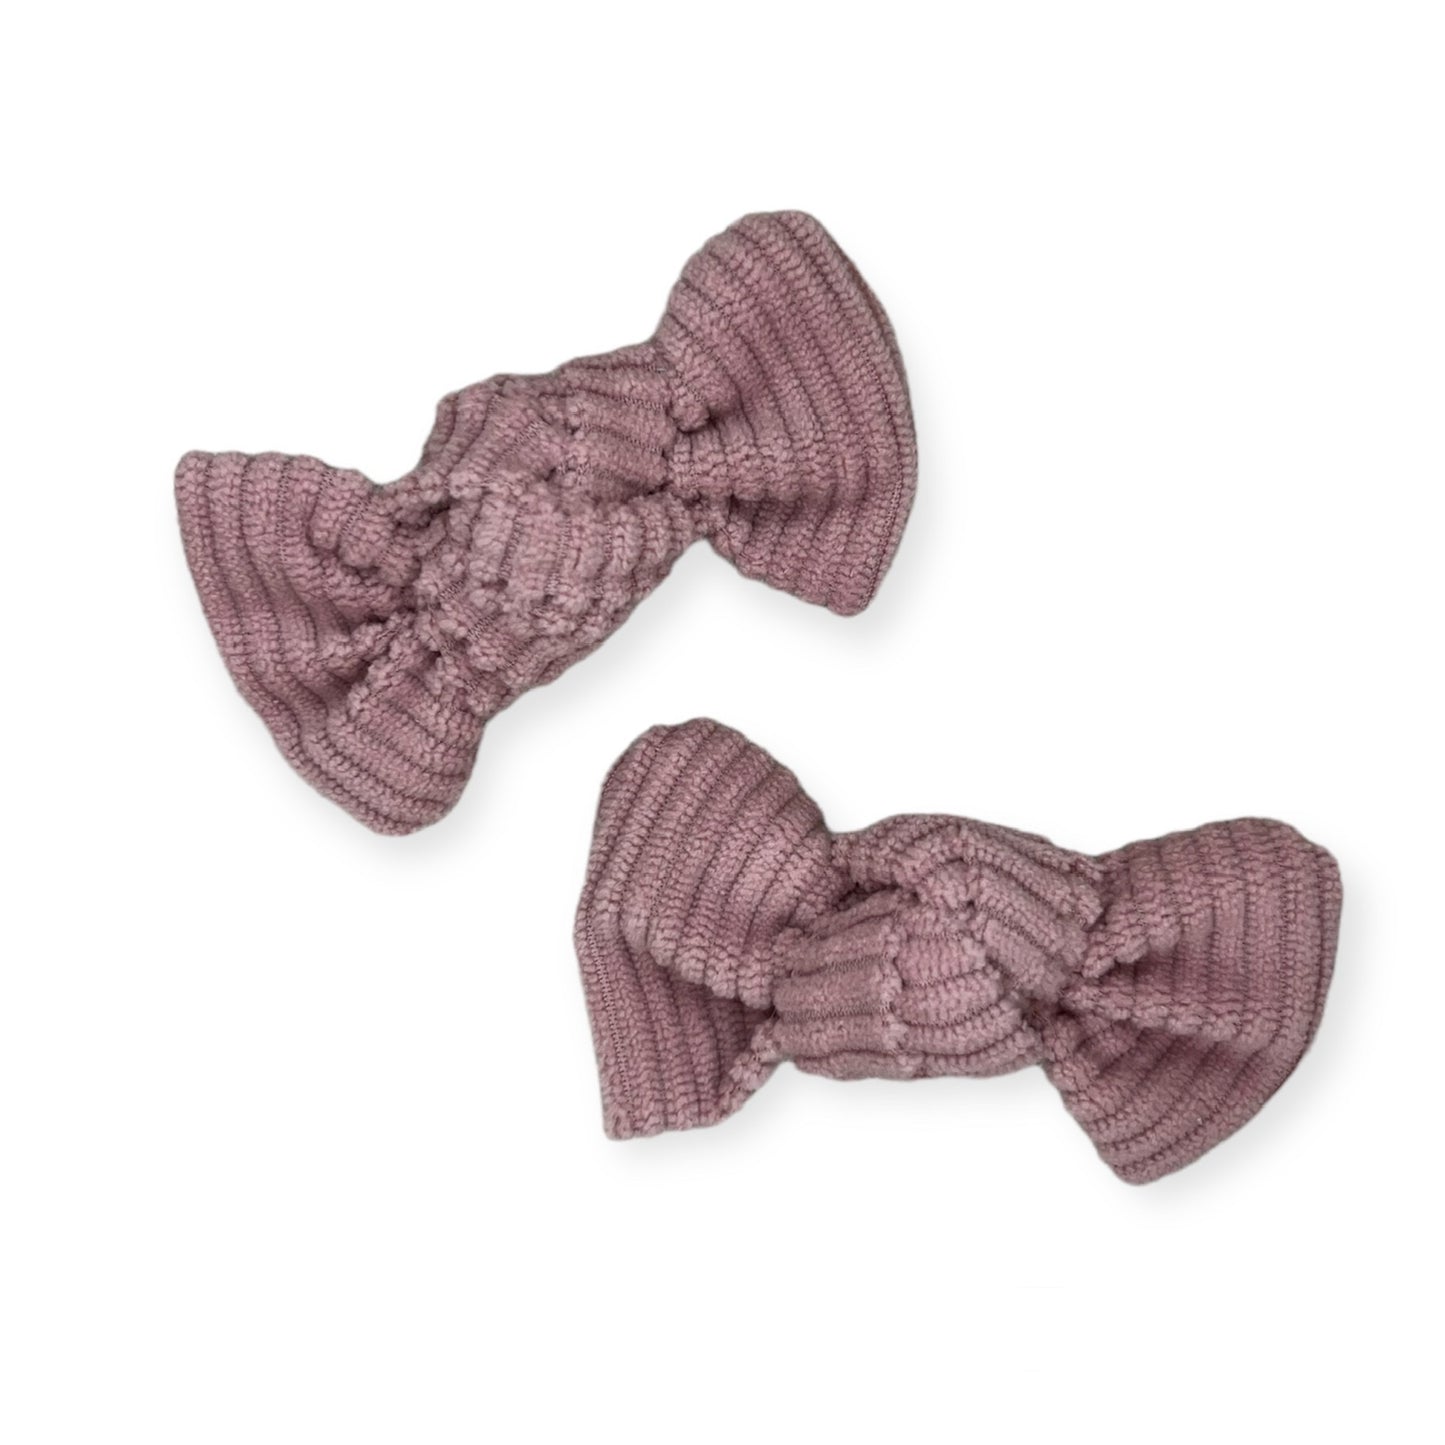 Knotted Pigtail Bows - Pink Corduroy